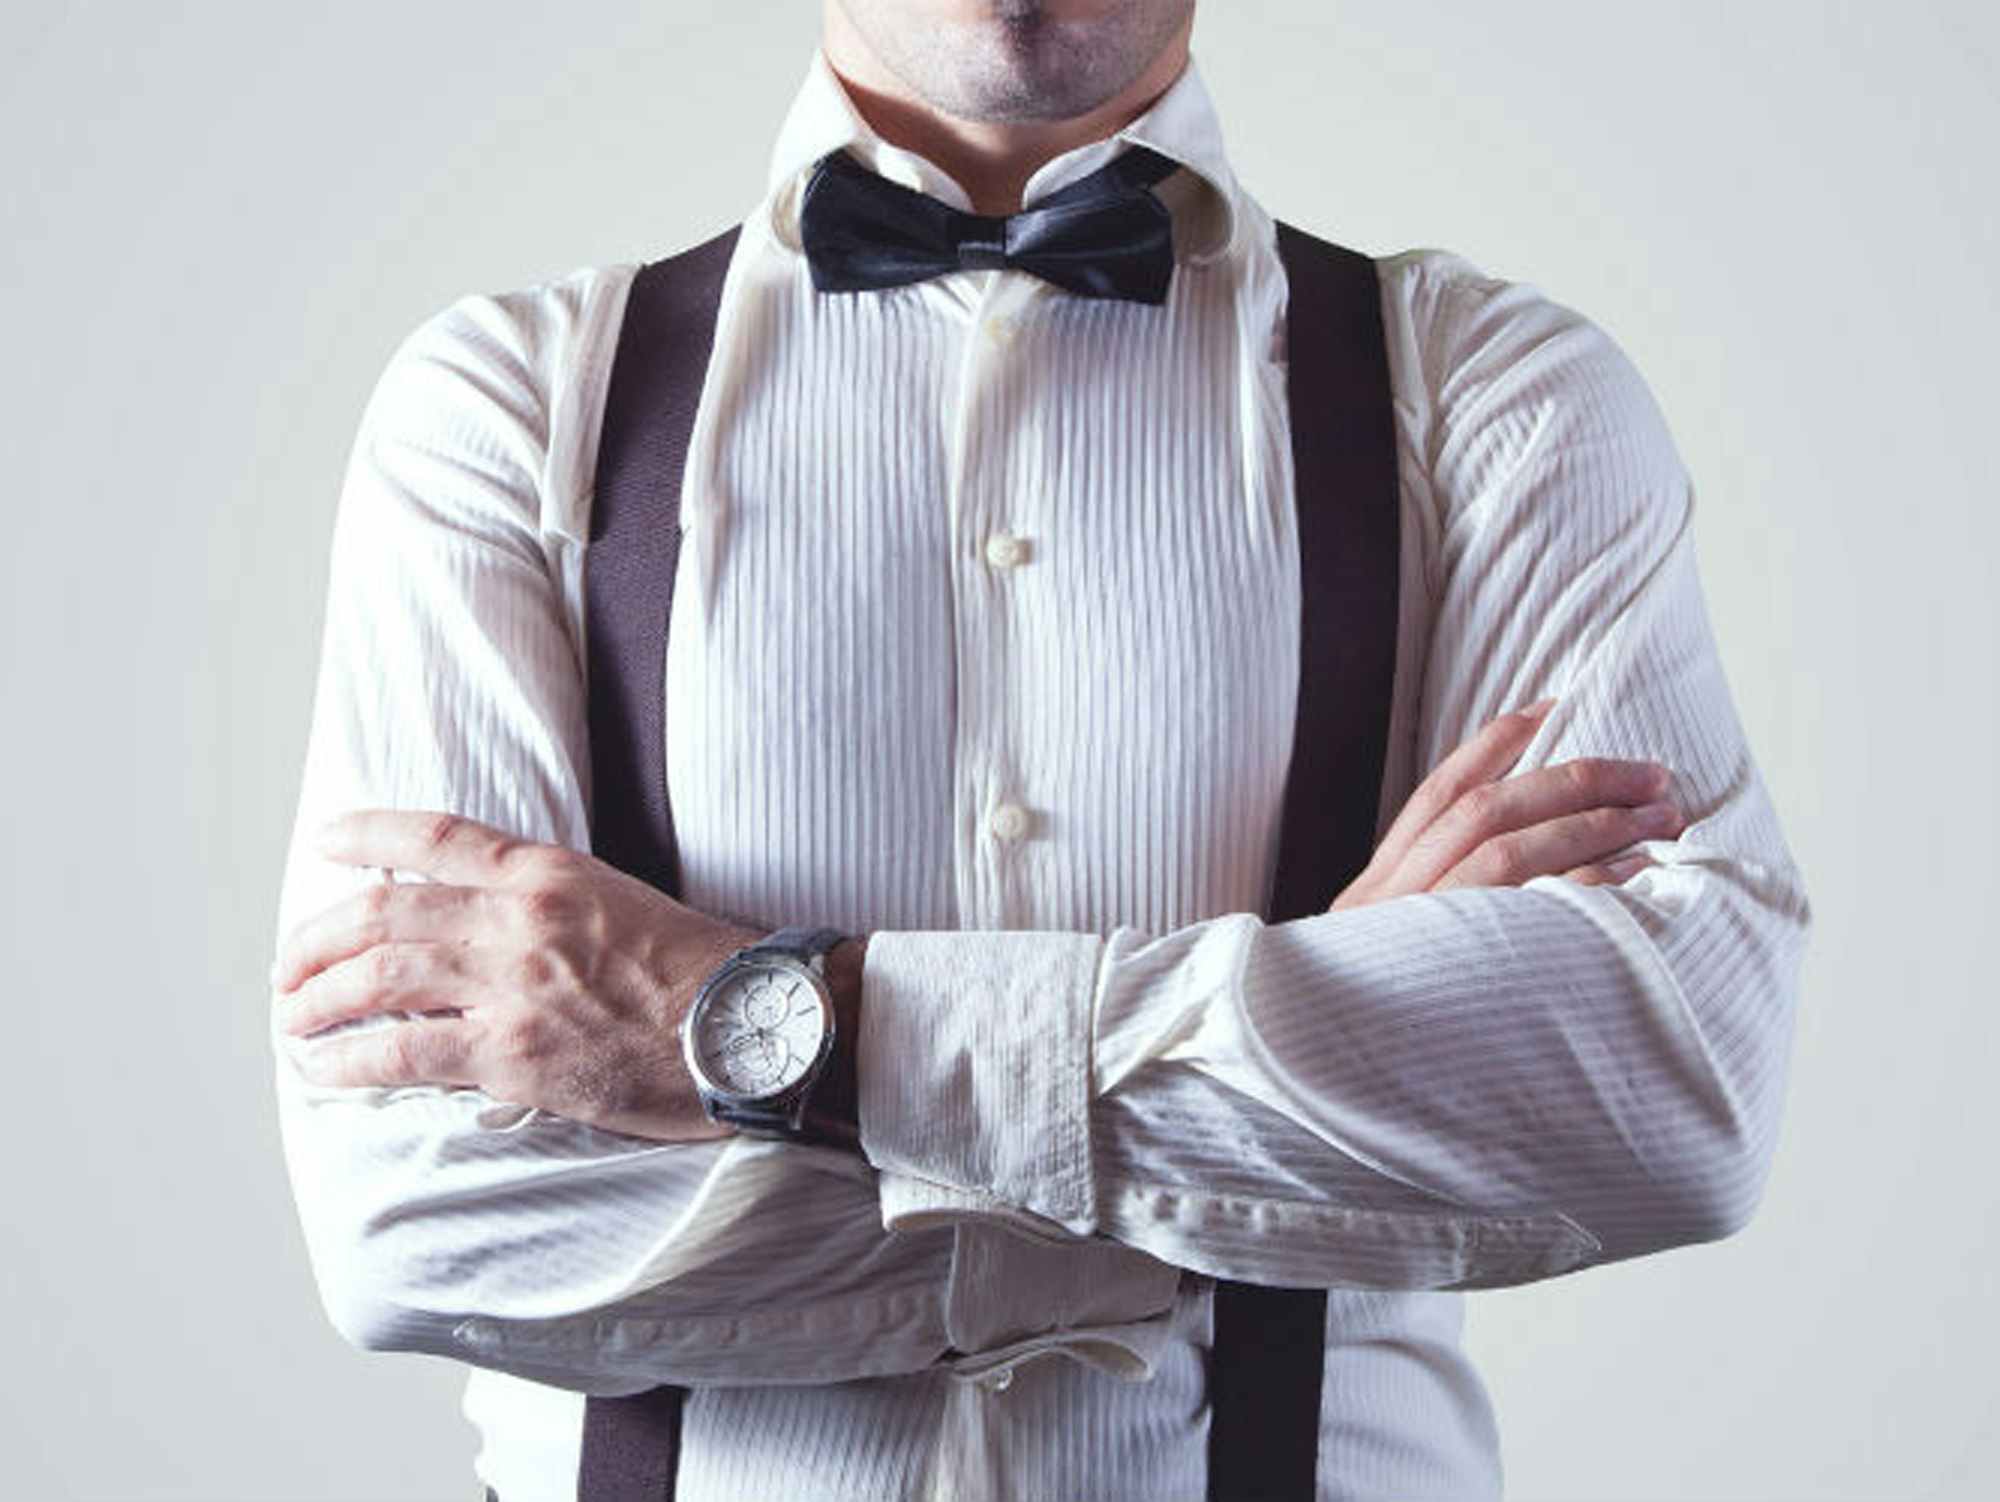 a person crossing their arms wearing suspenders and a bow tie